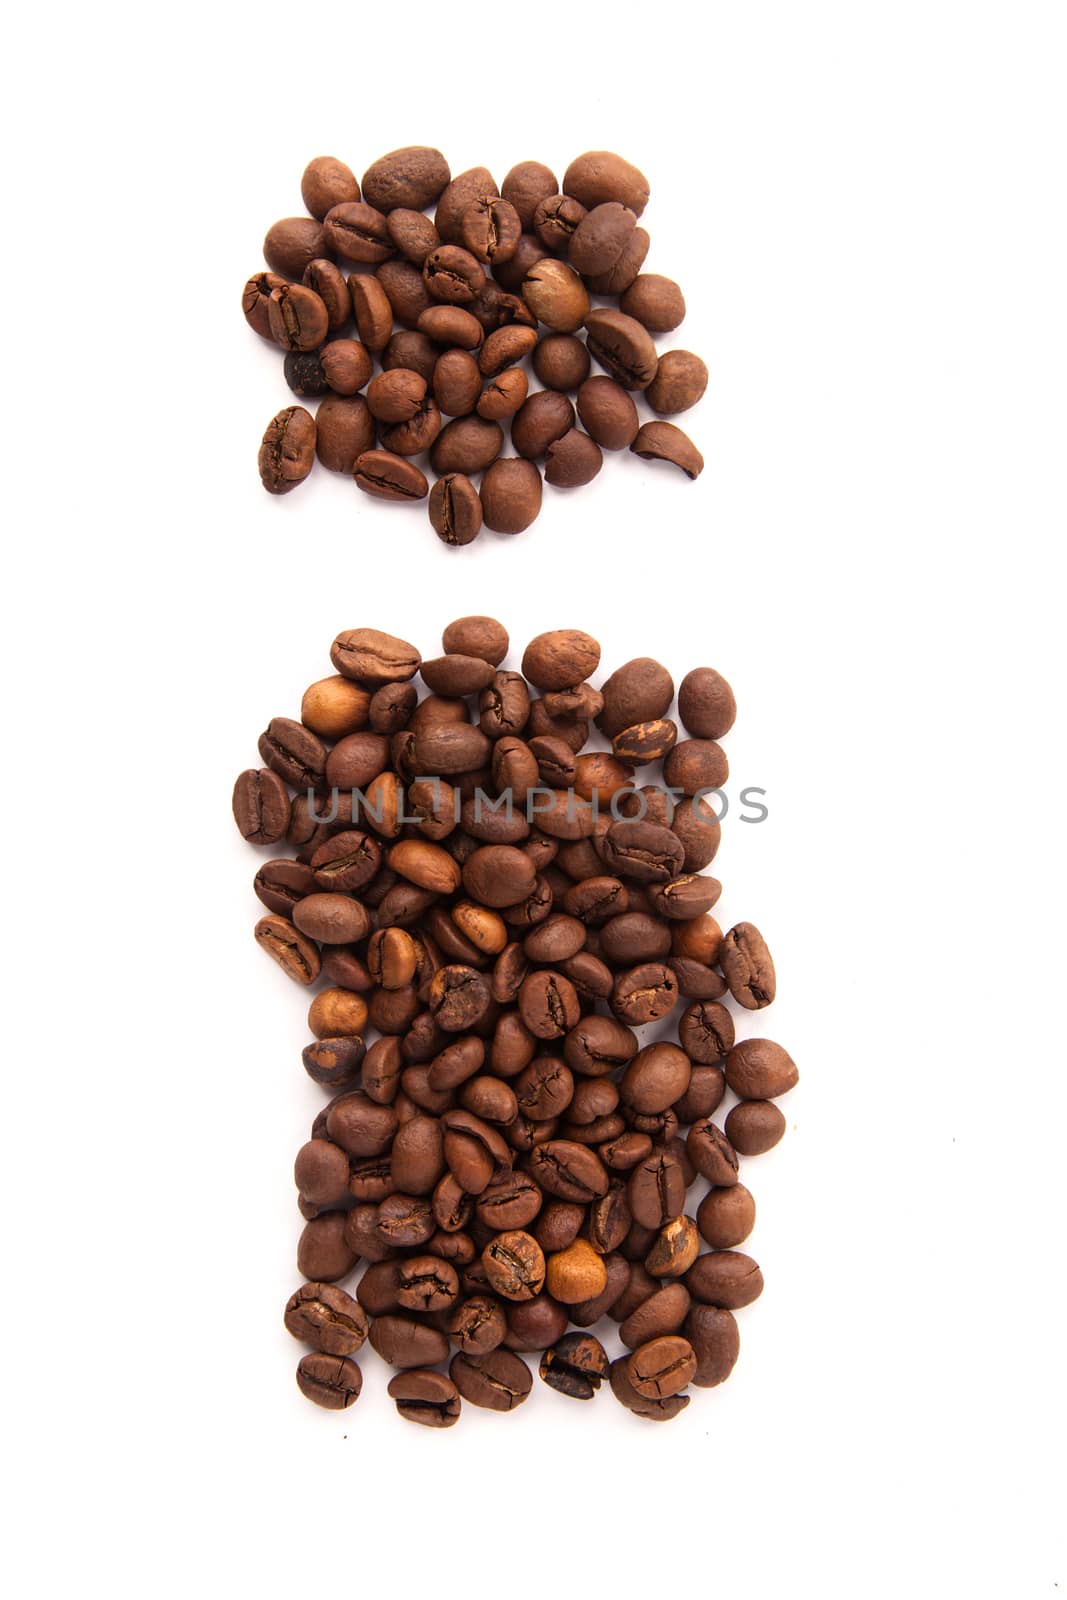 Alphabet letter I of roasted coffee beans isolated on white background by traza